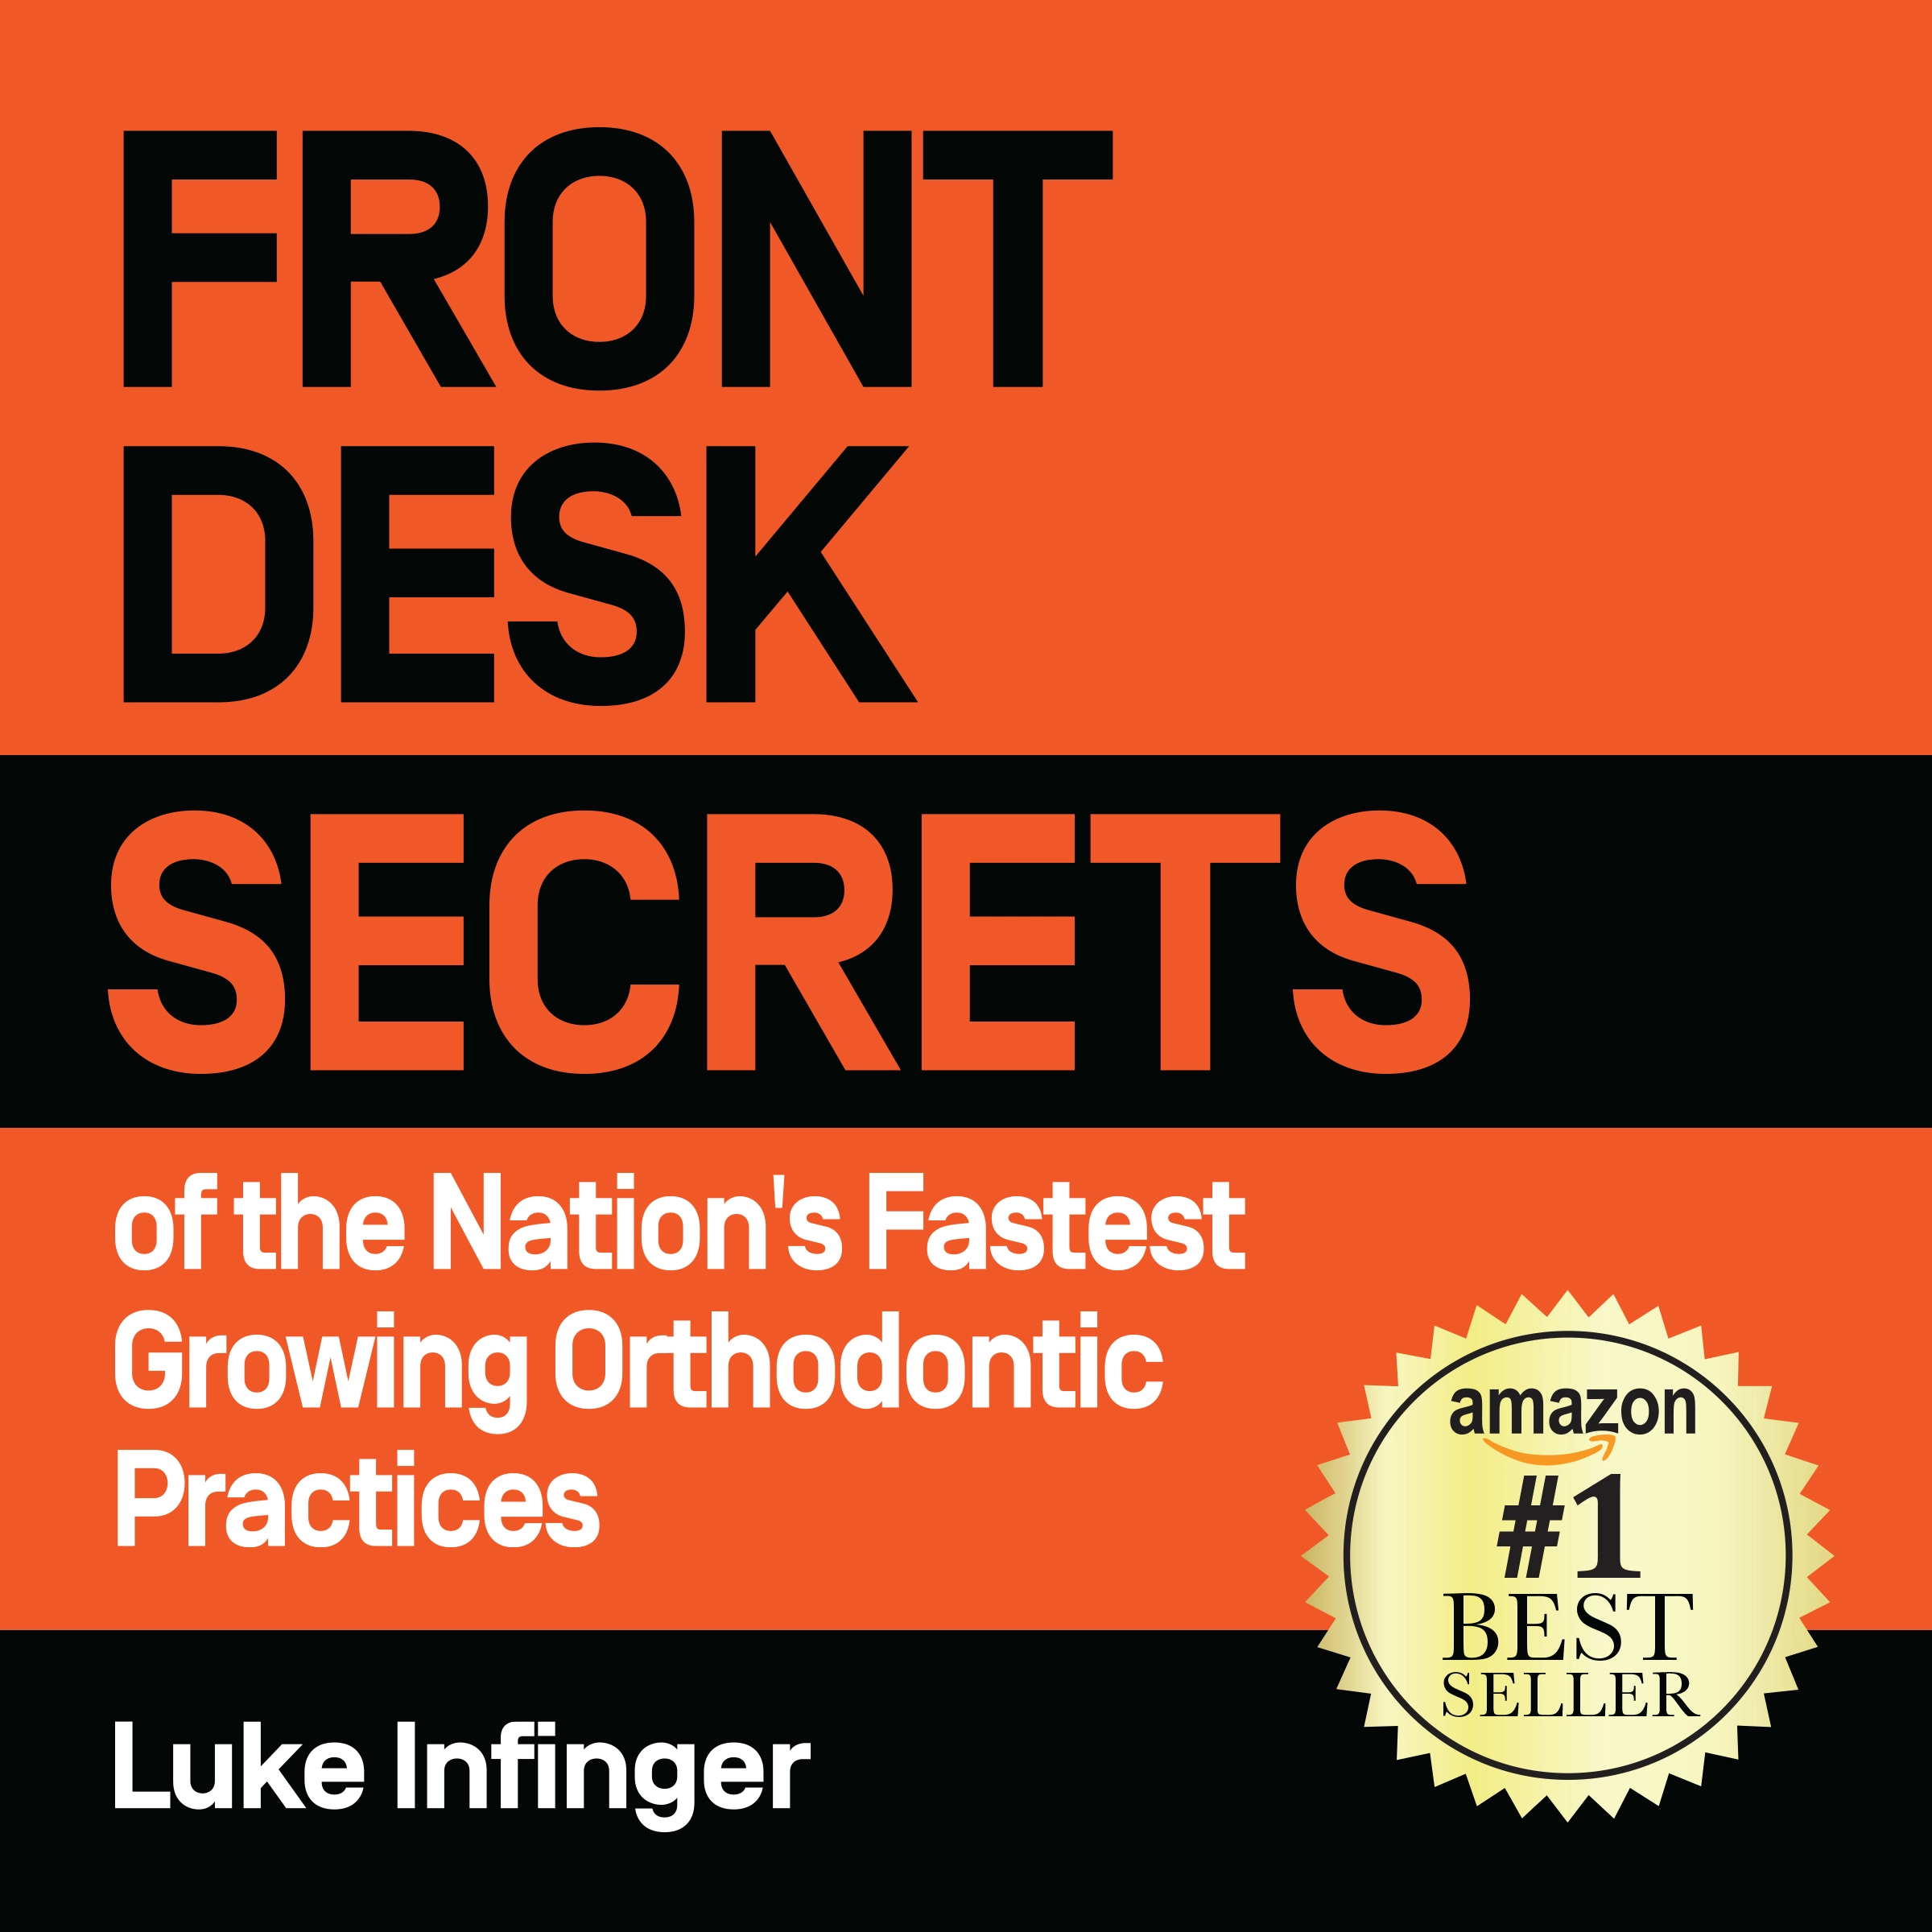 FRONT DESK SECRETS of the Nation's Fastest Growing Orthodontic Practices Audiobook by Luke Infinger